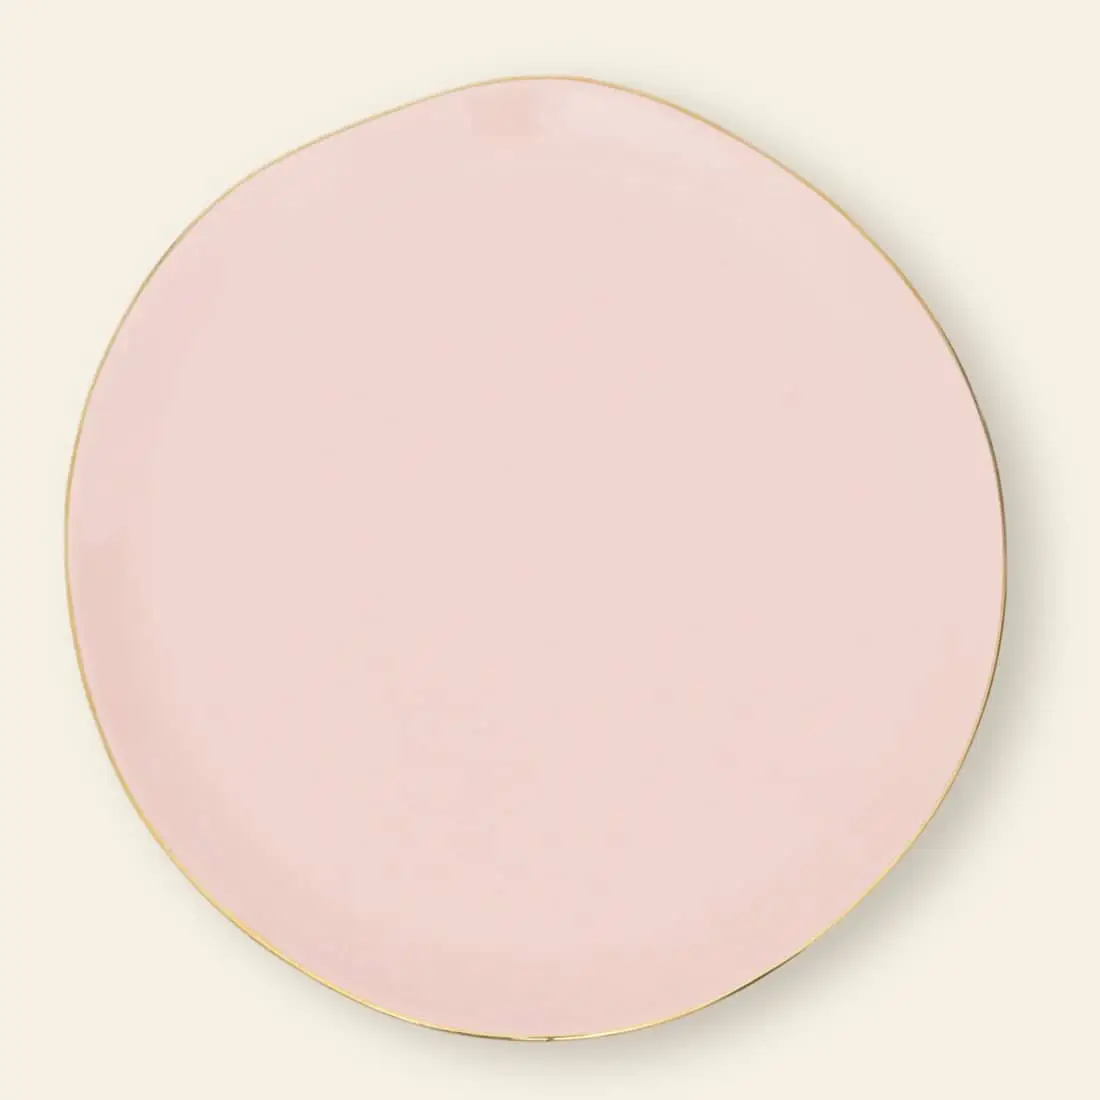 Urban Nature Culture Good Morning Breakfast Plate Old Pink 1